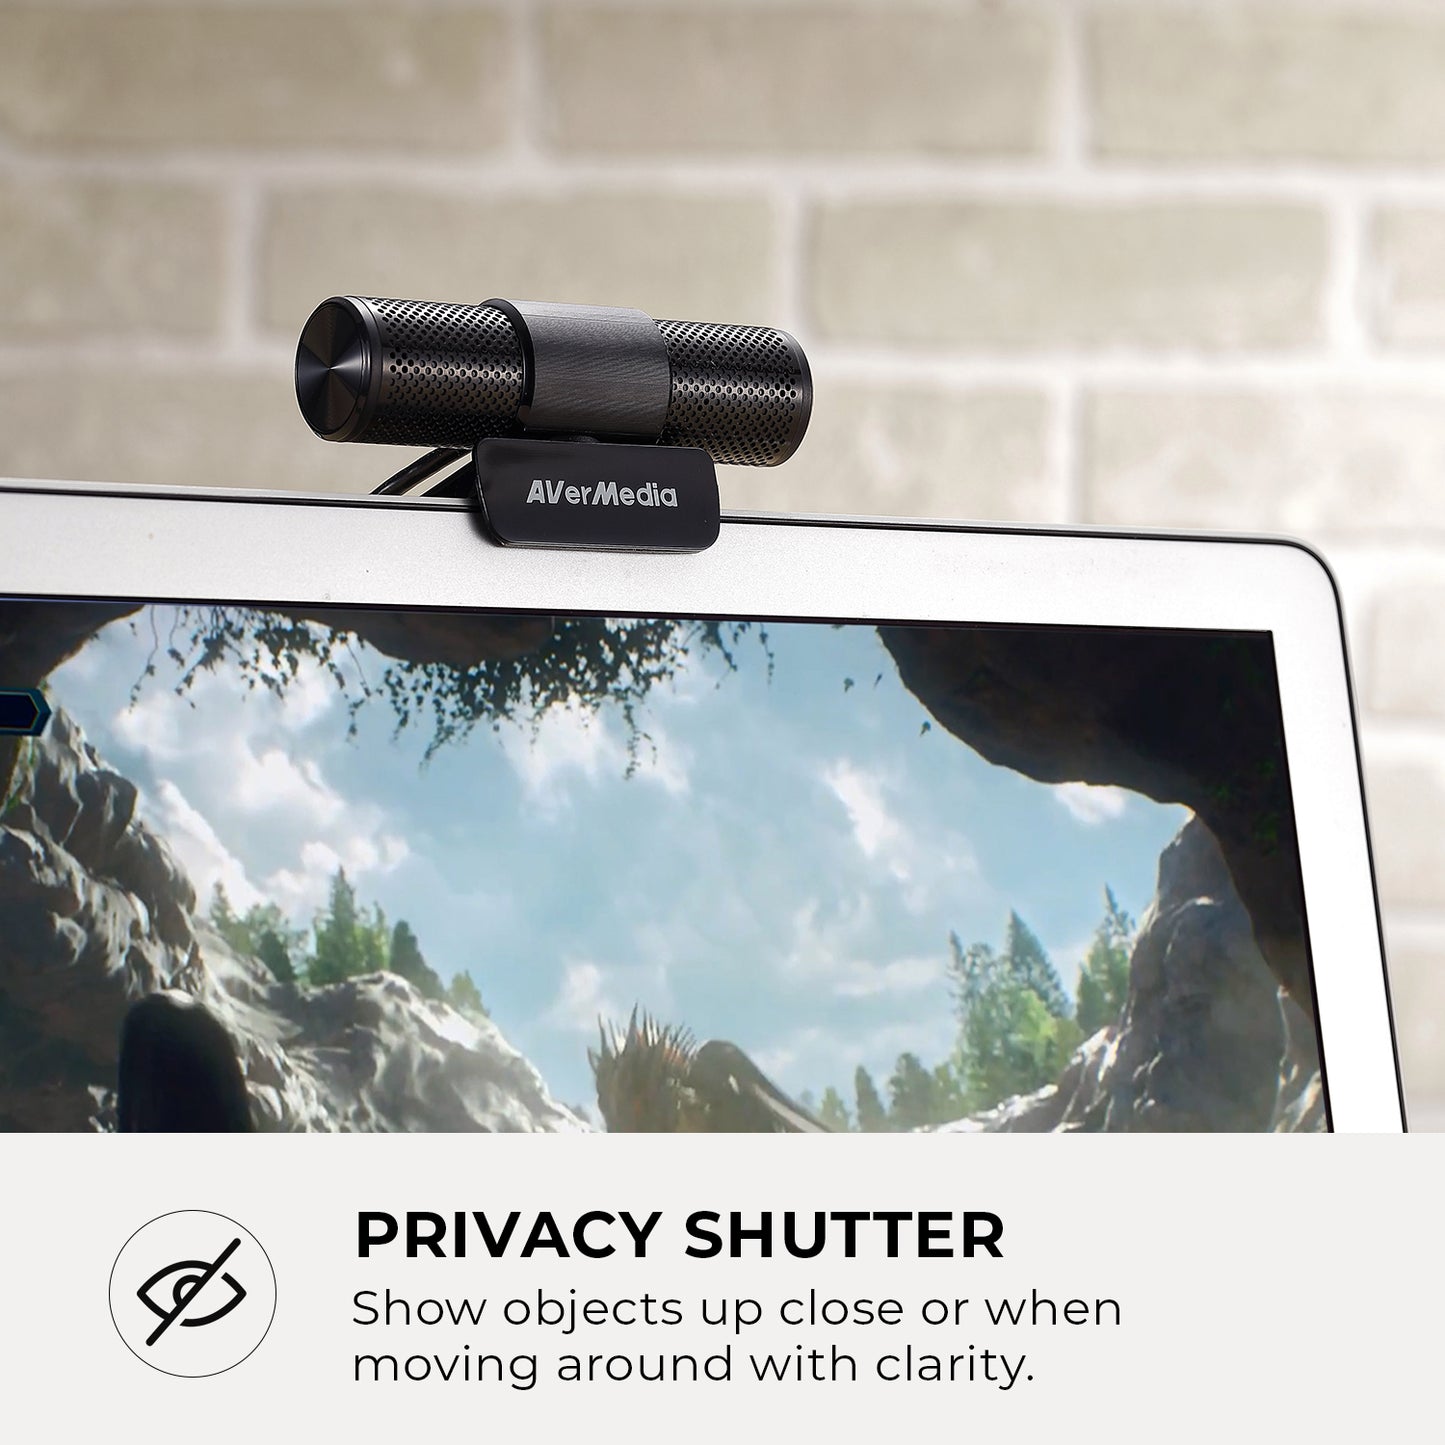 Privacy shutter: Show objects up close or when moving around with clarity.